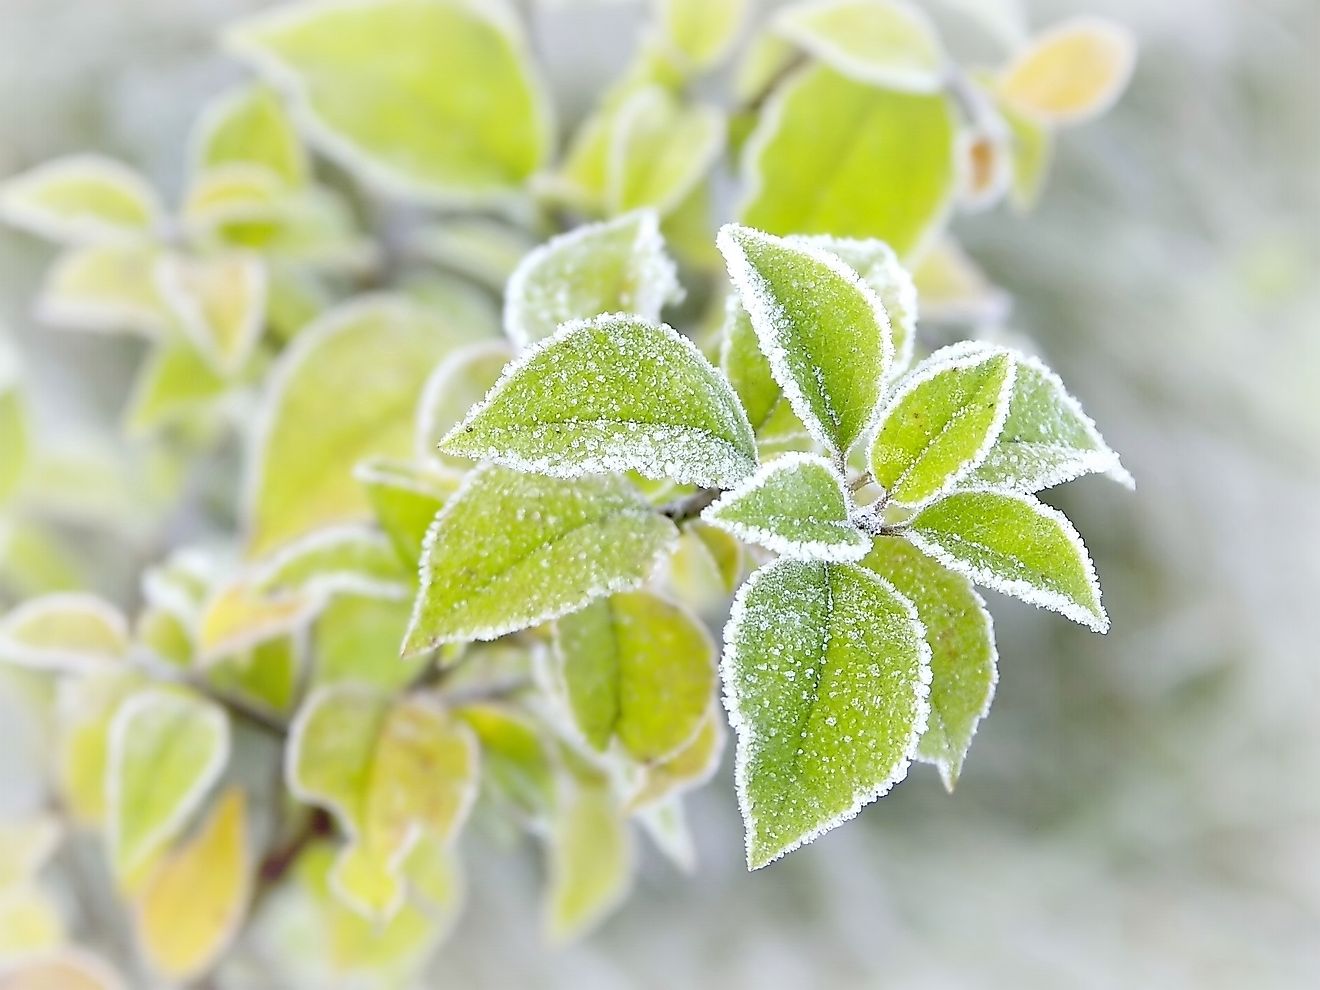 This plant movement happens as a response to the change of temperature in the environment, as heat or cold.